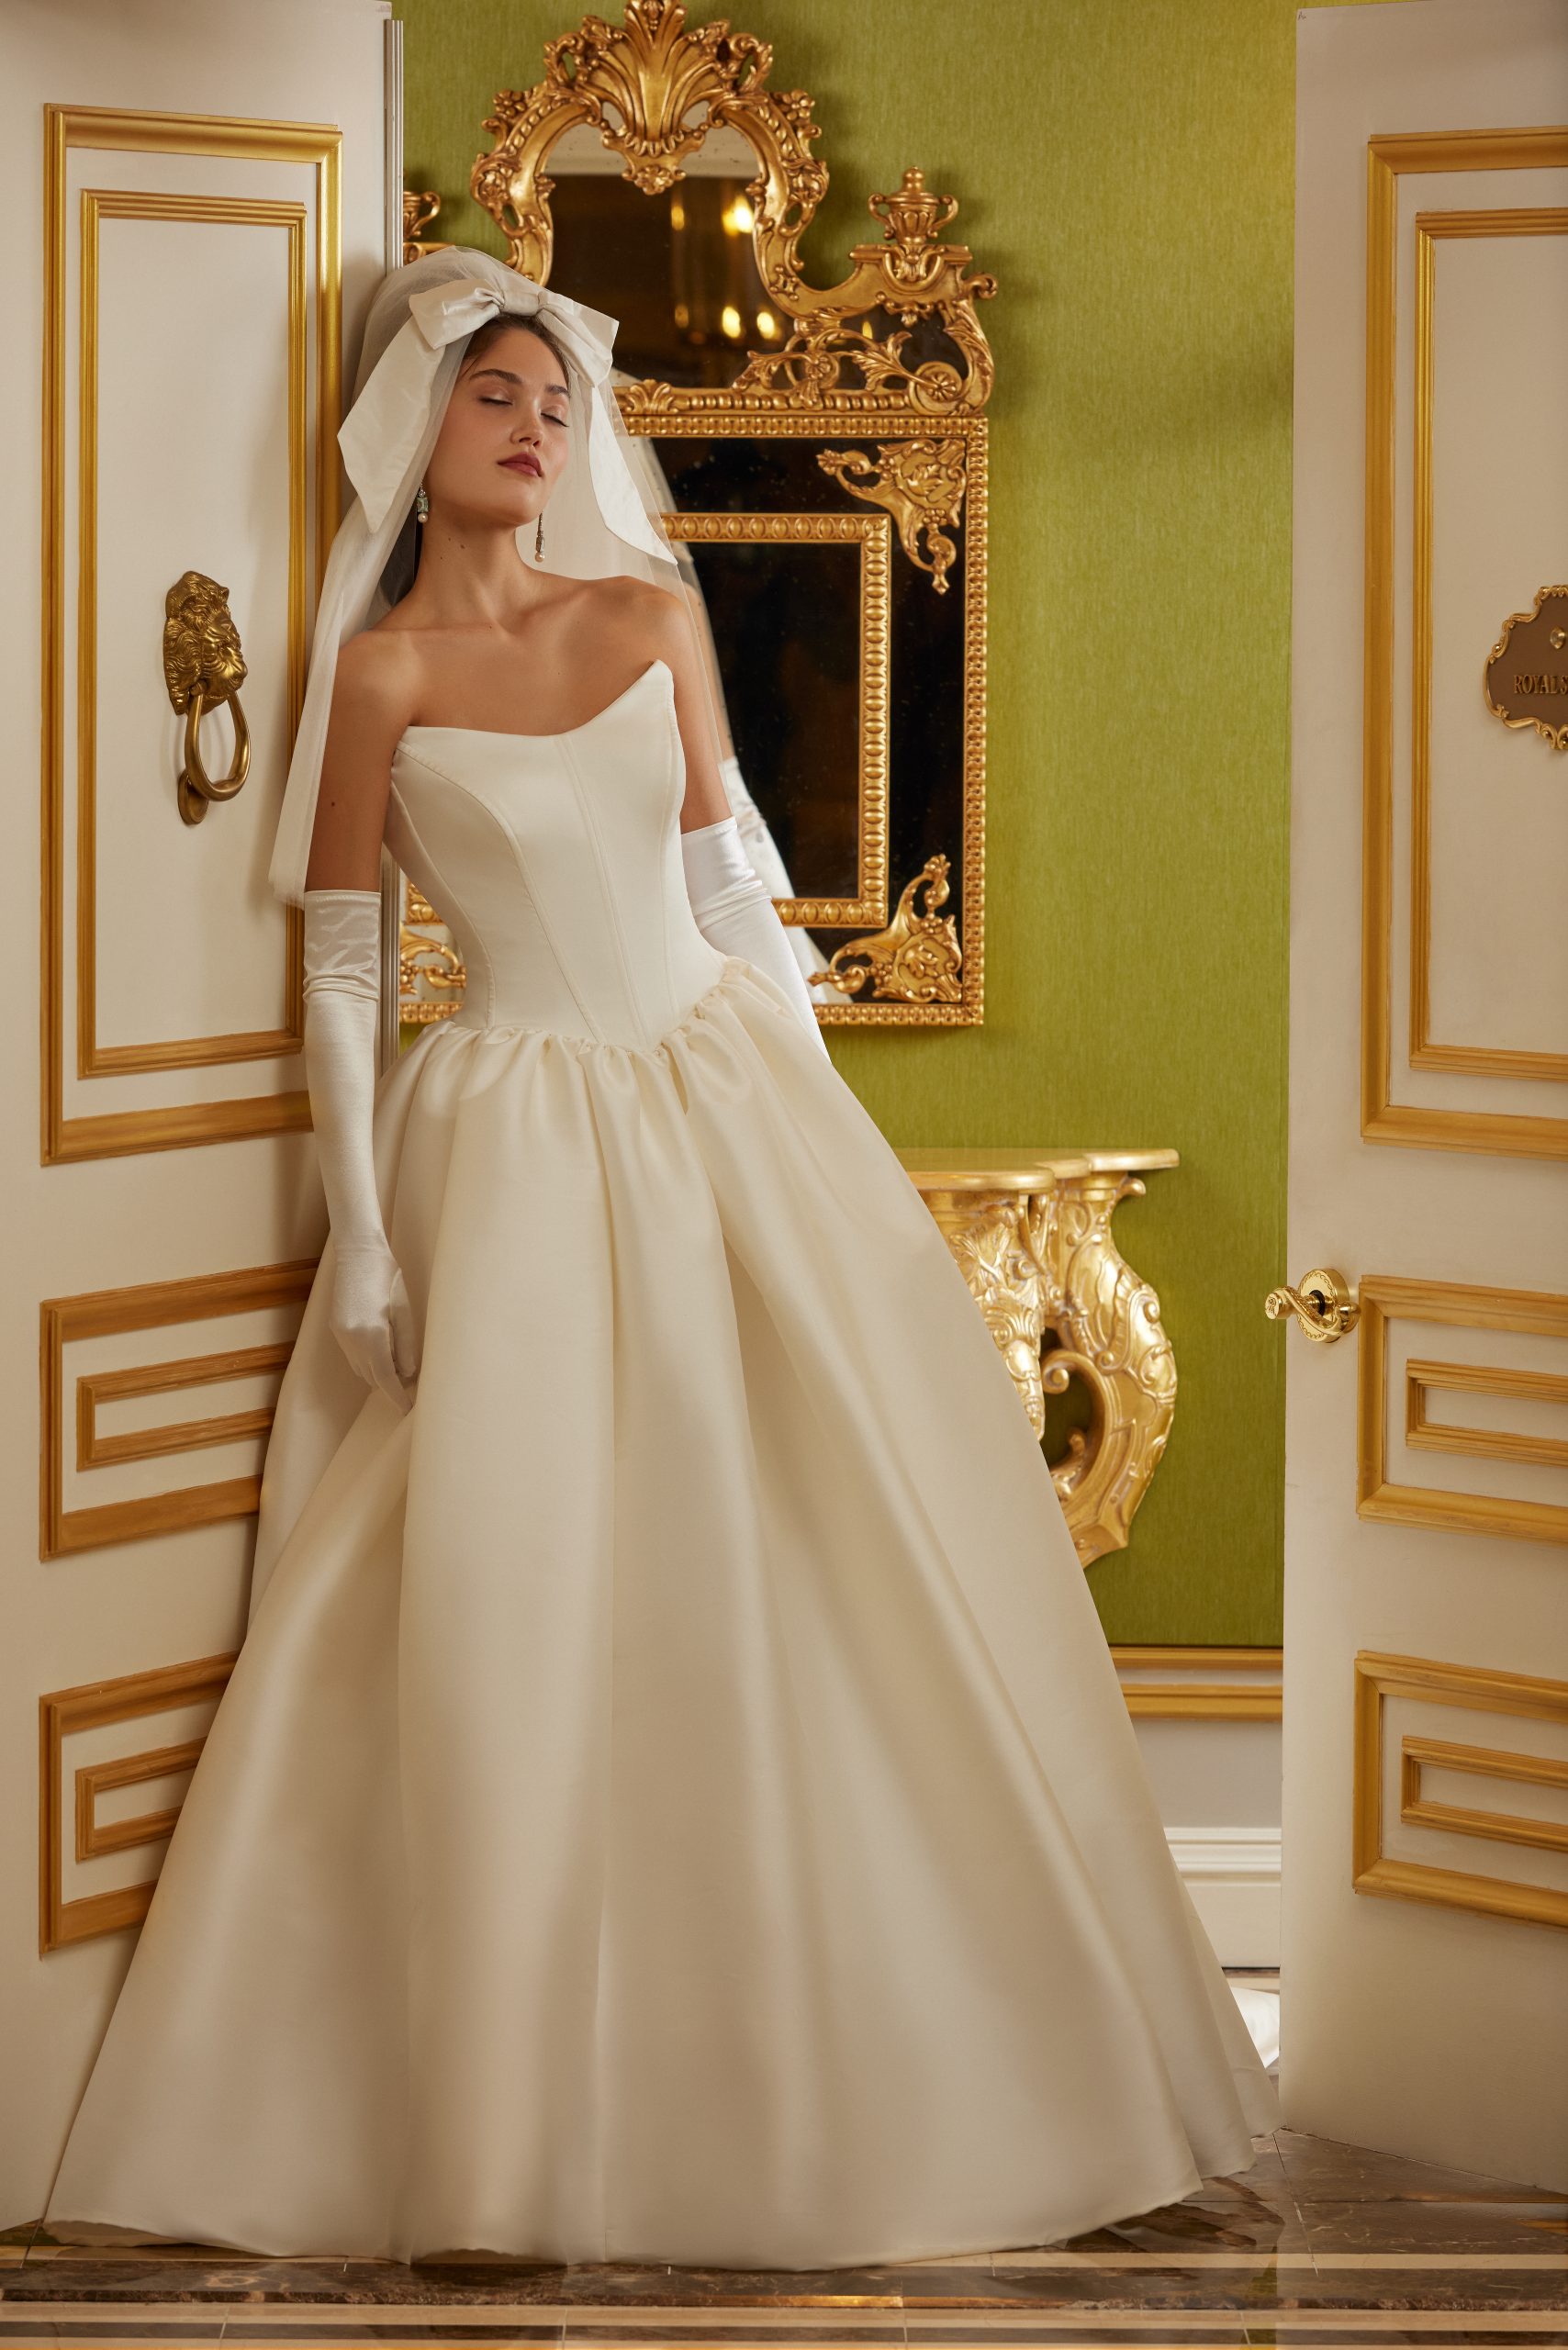 Timeless Drop-Waist Ball Gown With Bow by Sareh Nouri - Image 1